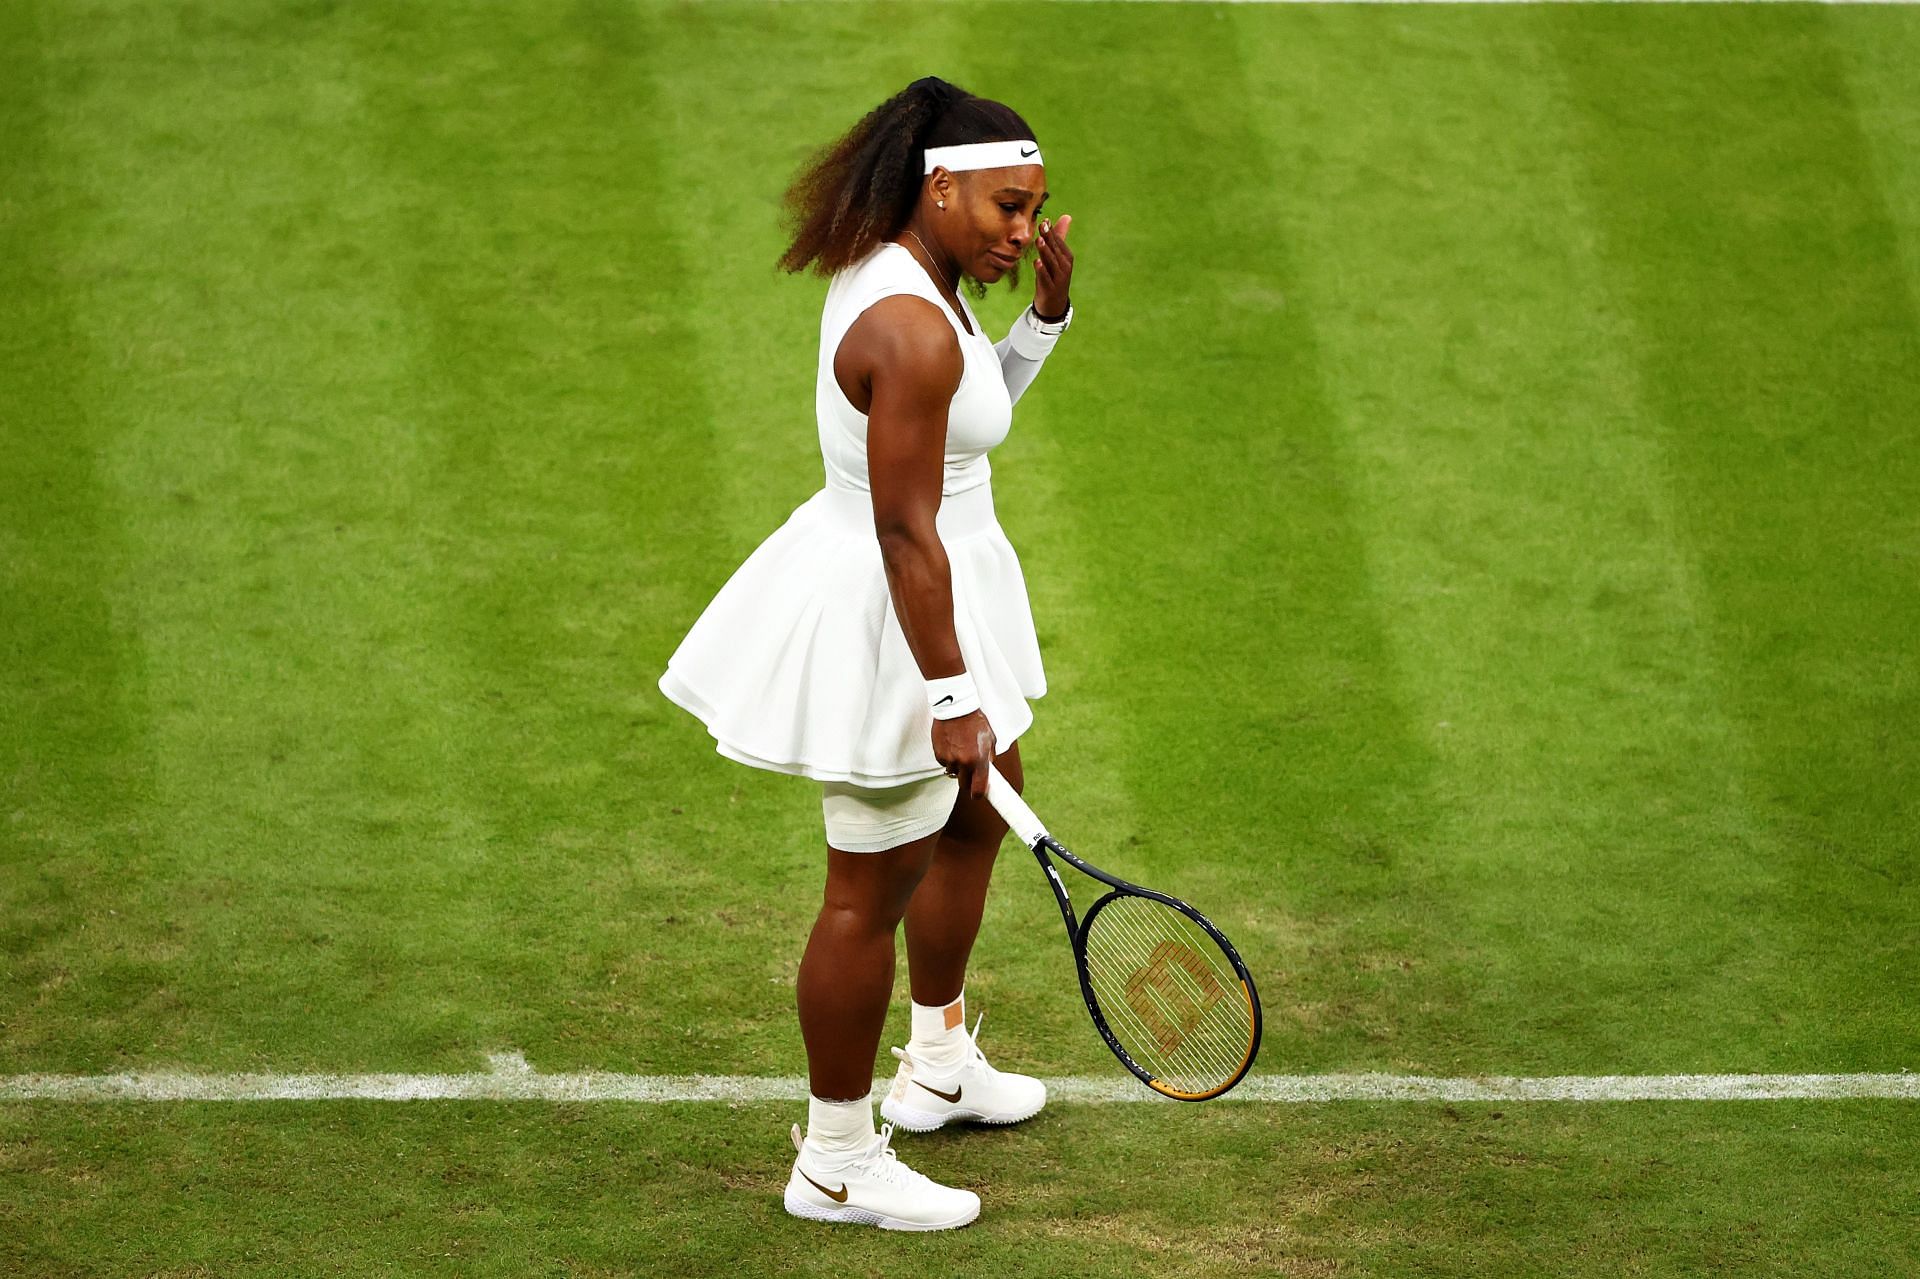 Serena Williams pictures at the 2021 Wimbledon Championships